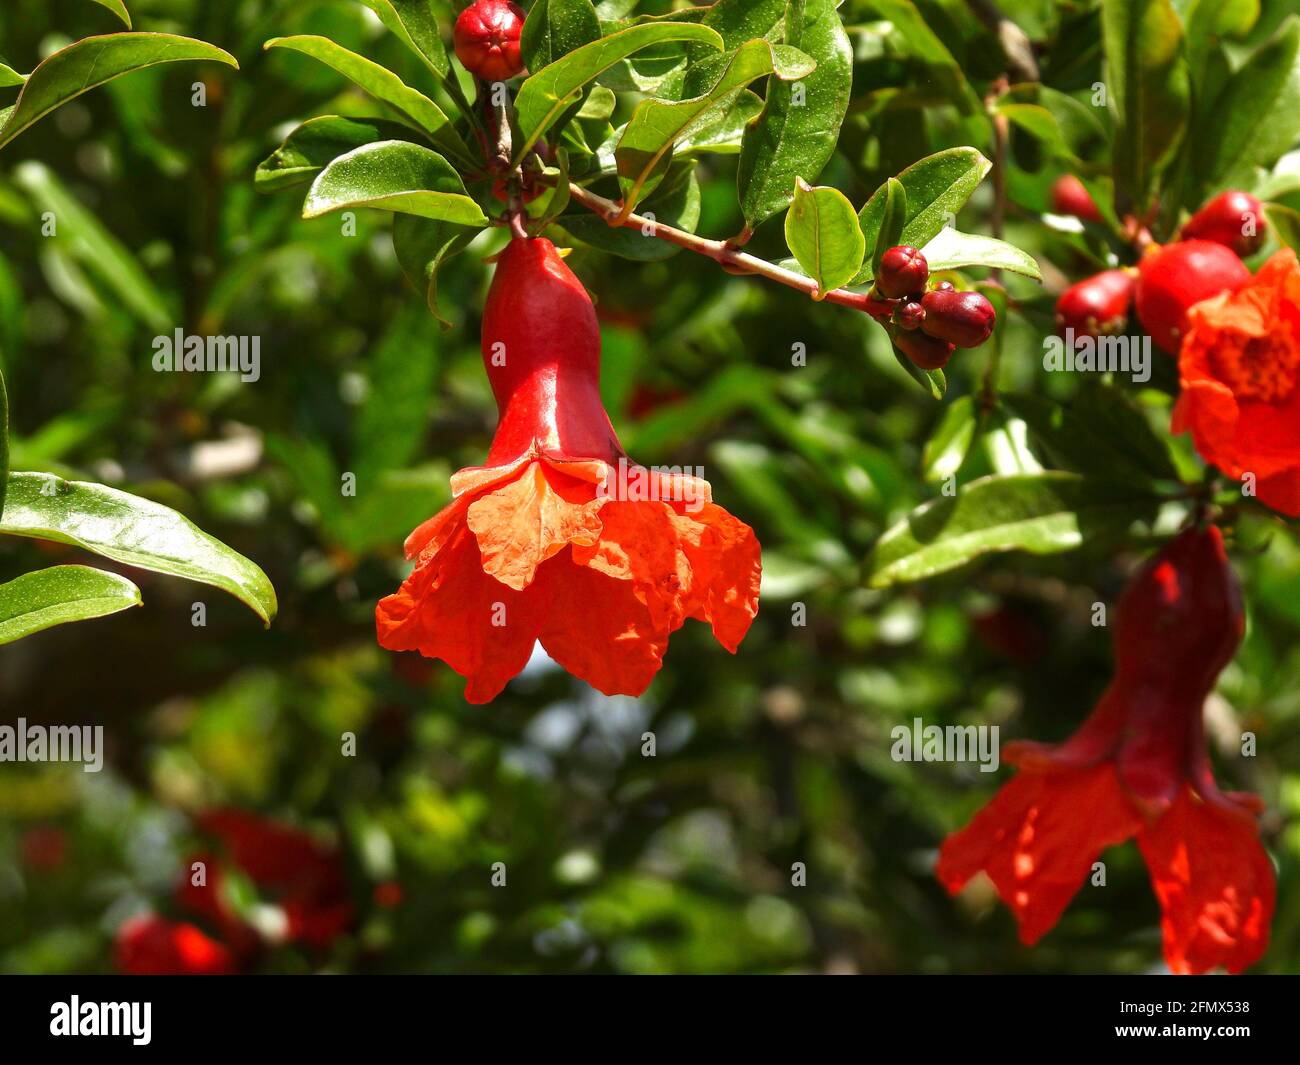 Branch with flowers and ovary of fruit of a pomegranate tree closeup on a background of green foliage Stock Photo